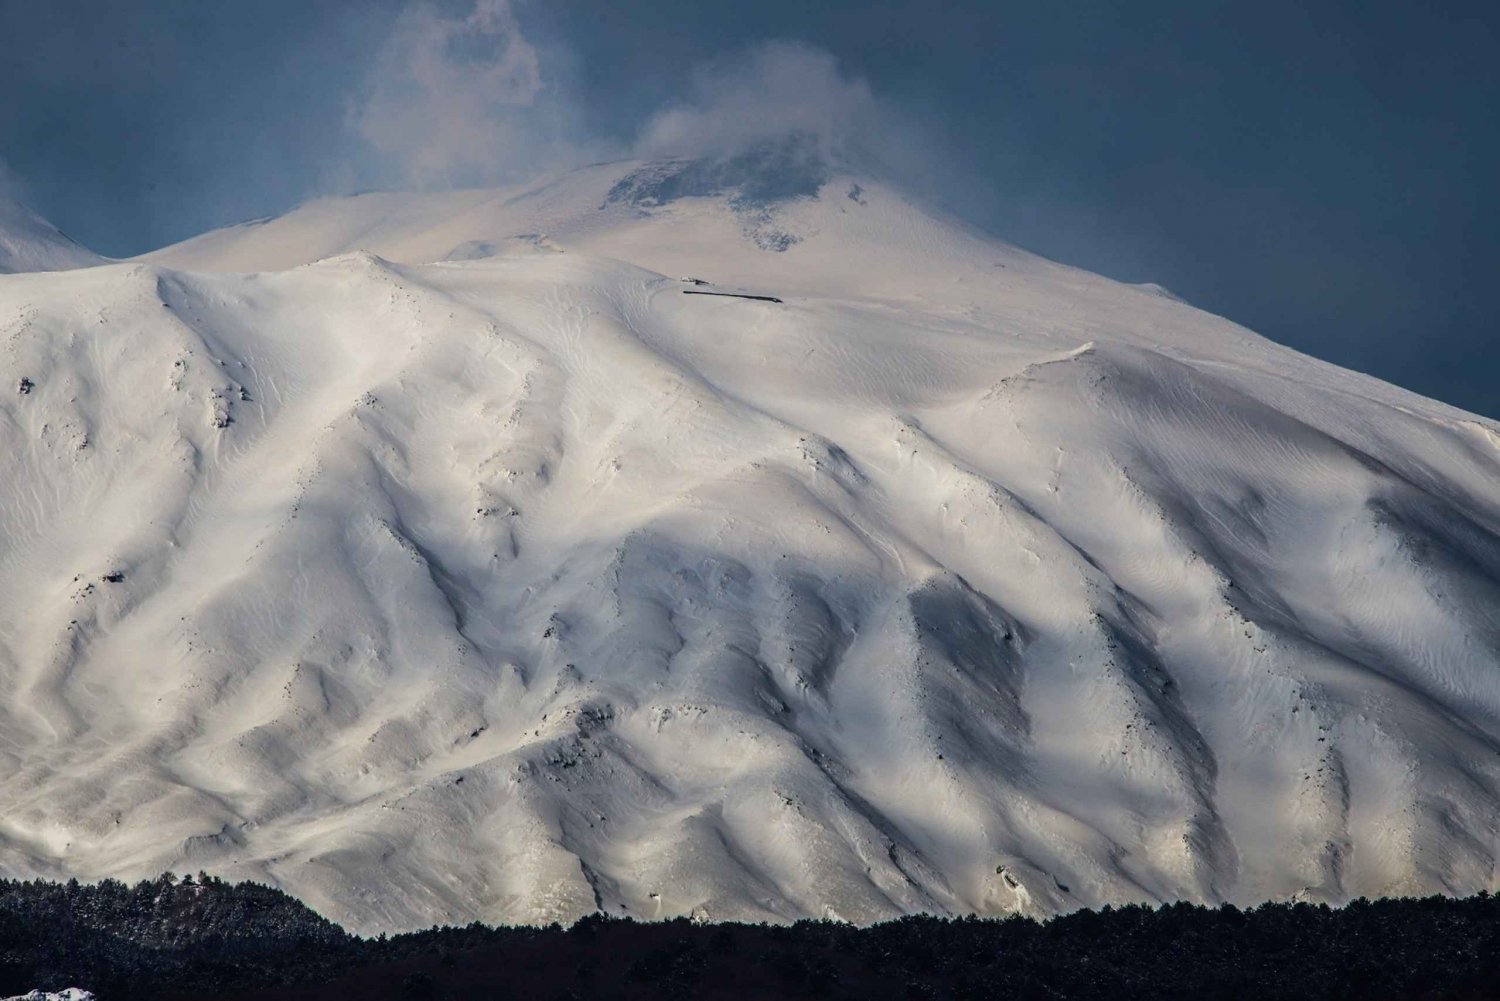 From Linguaglossa: Mount Etna Alpine Skiing Guided Tour